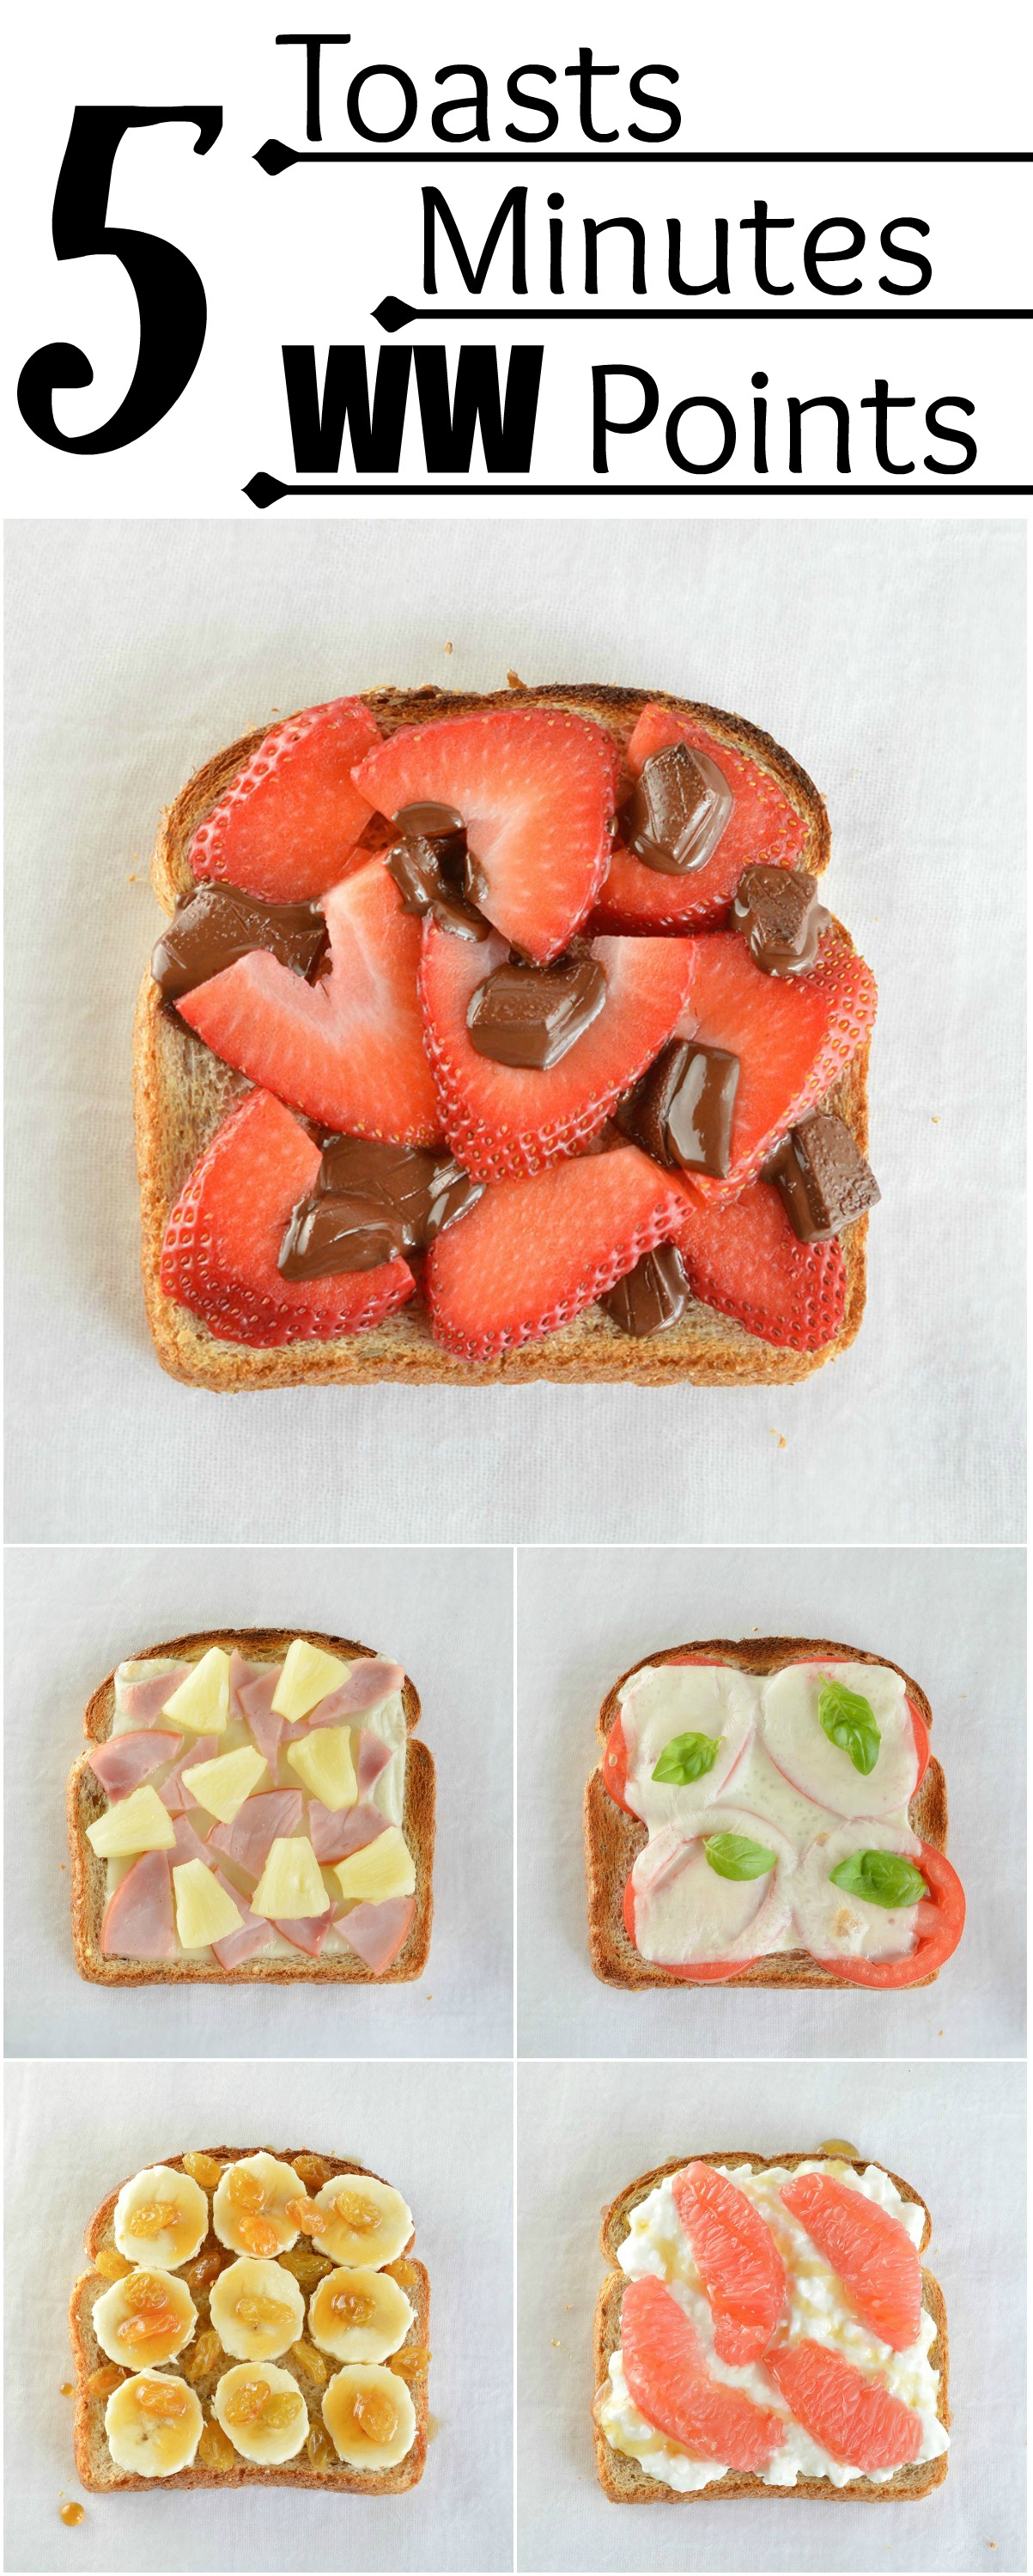 5 Minute Healthy Snack Ideas